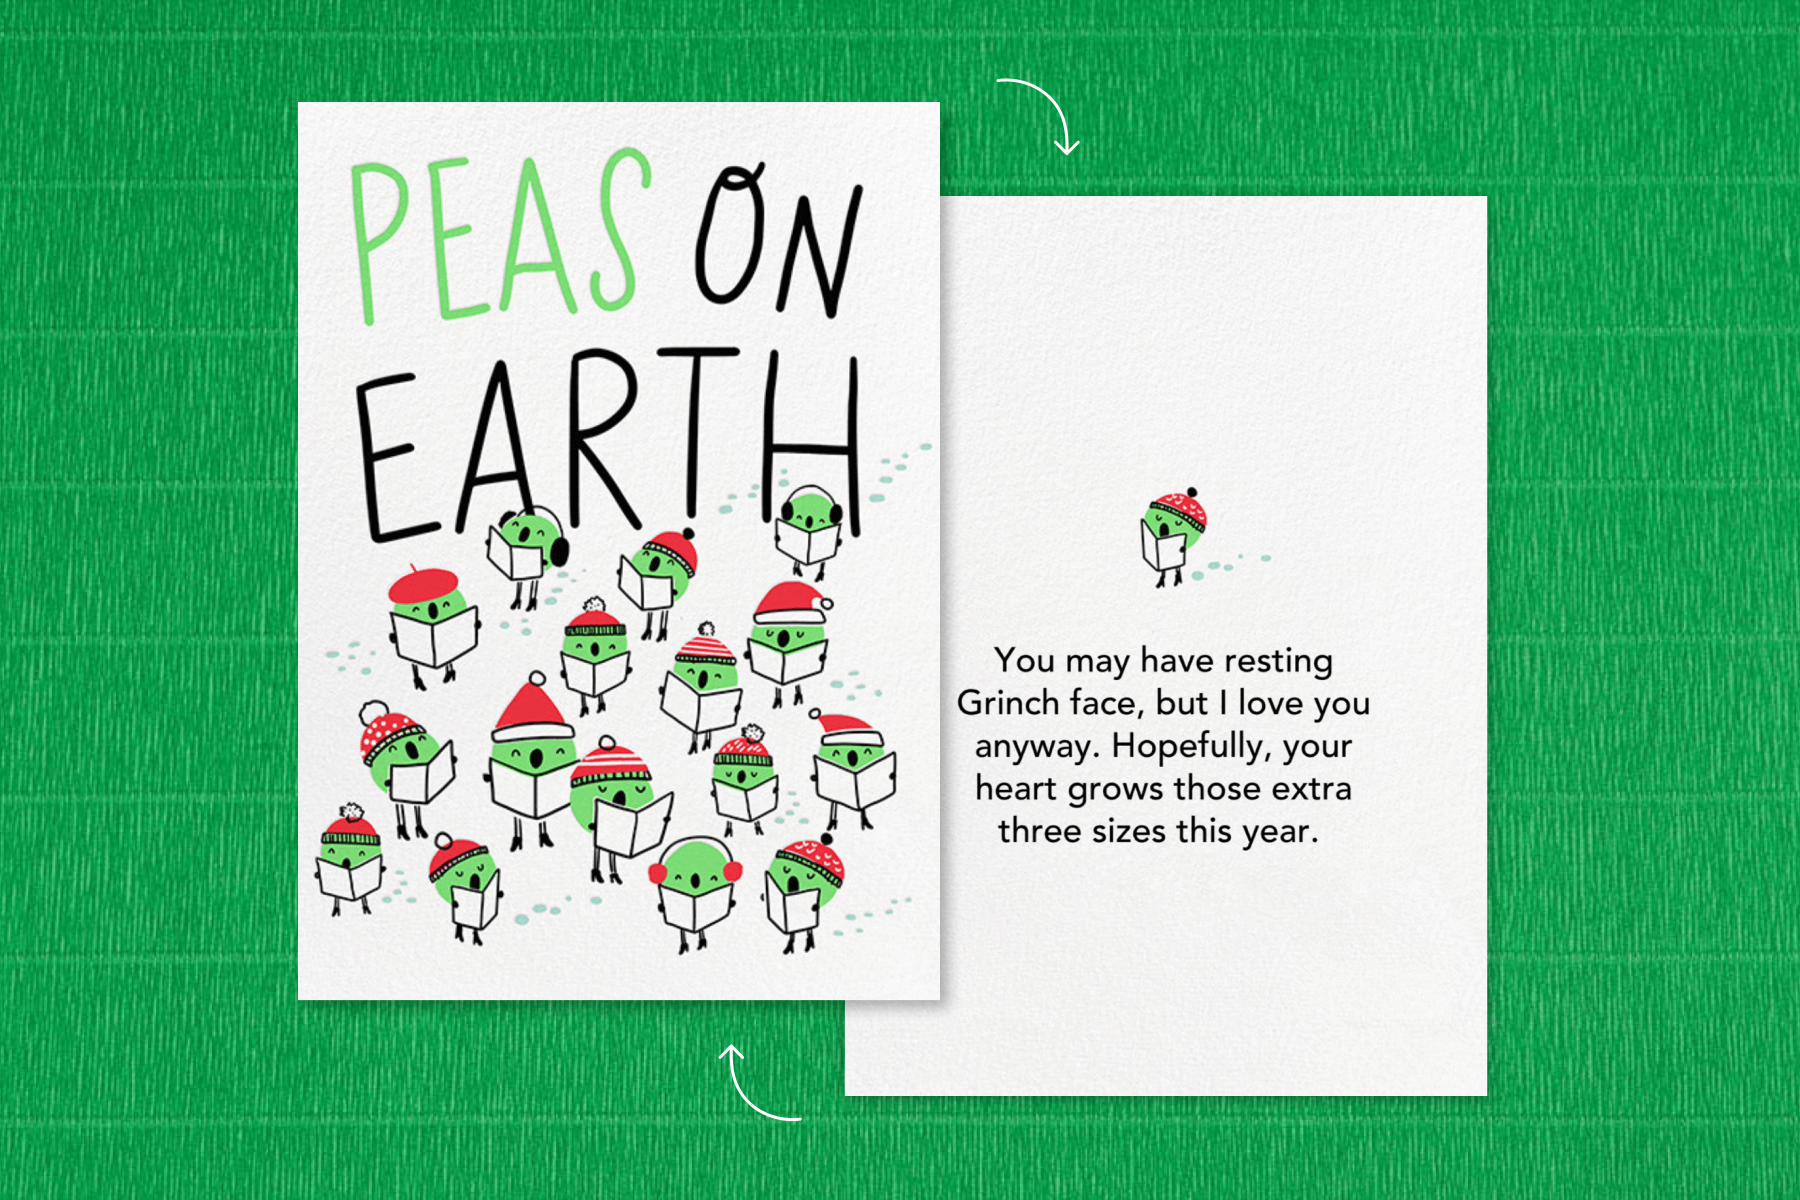 How to Write Holiday Cards During a Pandemic: 5 Ways to Share With